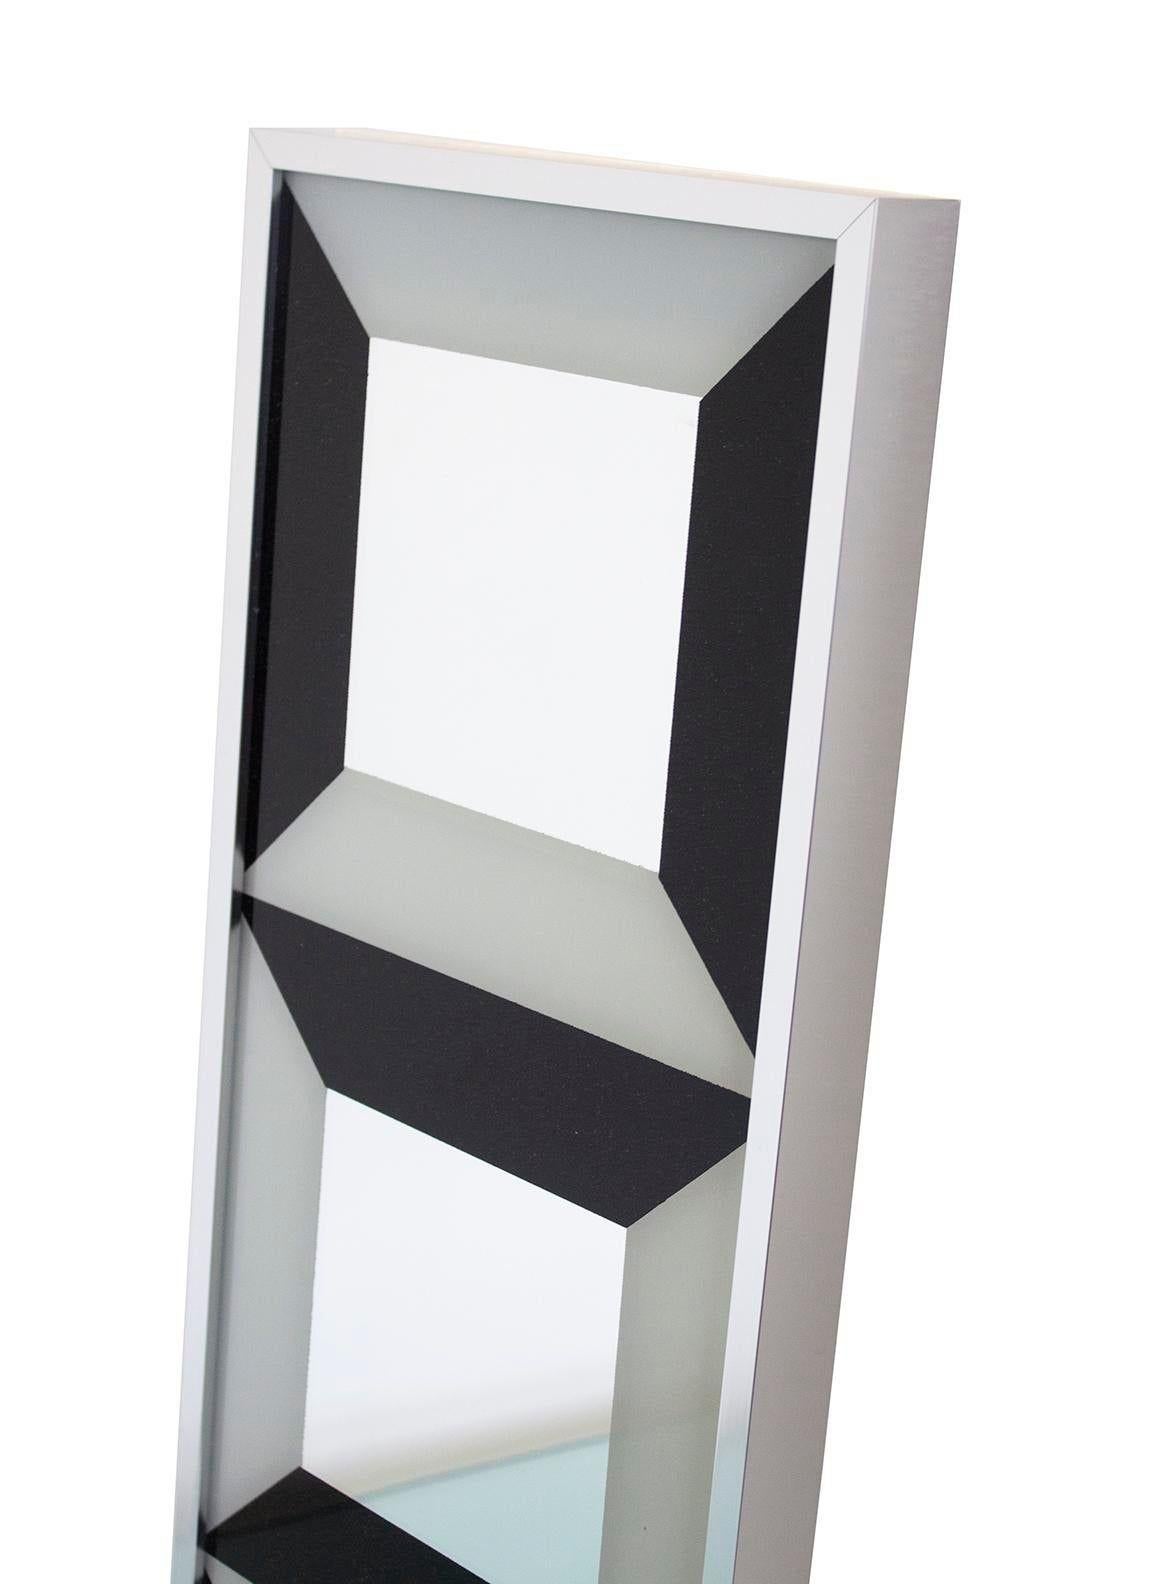 USA, 1970s
Op Art Mirror by Verner Panton / Turner Mfg. This is a vertical configuration of three squares with a black and white op art border around a center mirrored panel. This slim profile piece would be a great piece for a smaller wall space